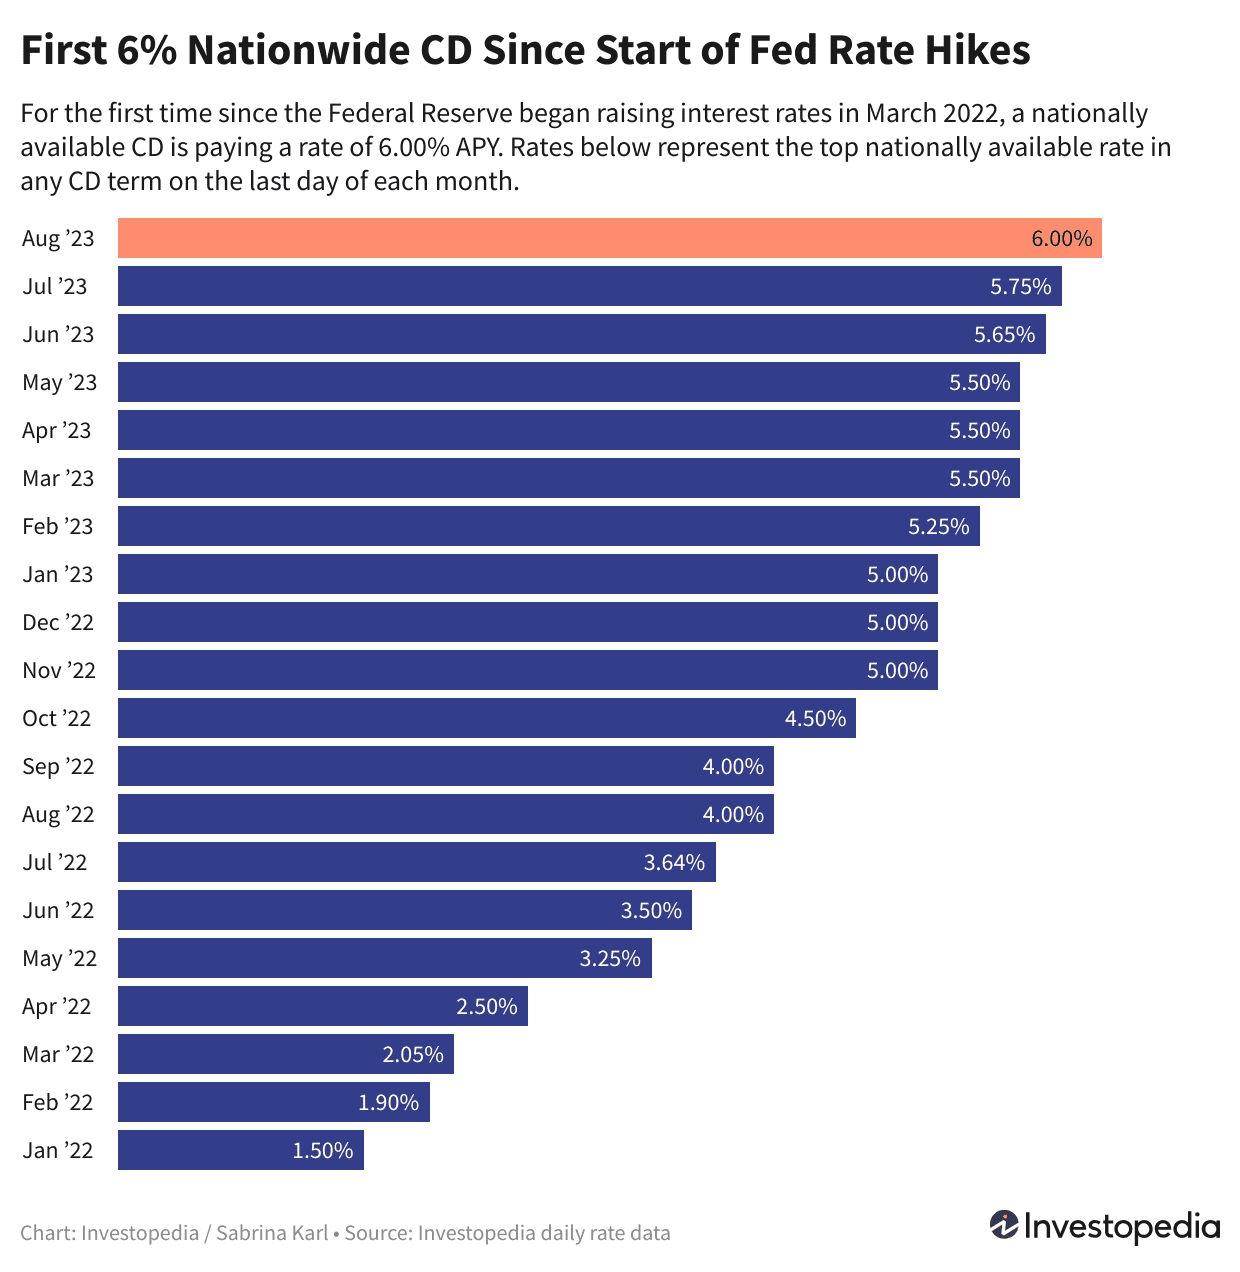 First 6% Nationwide CD Since Start of Fed Rate Hikes